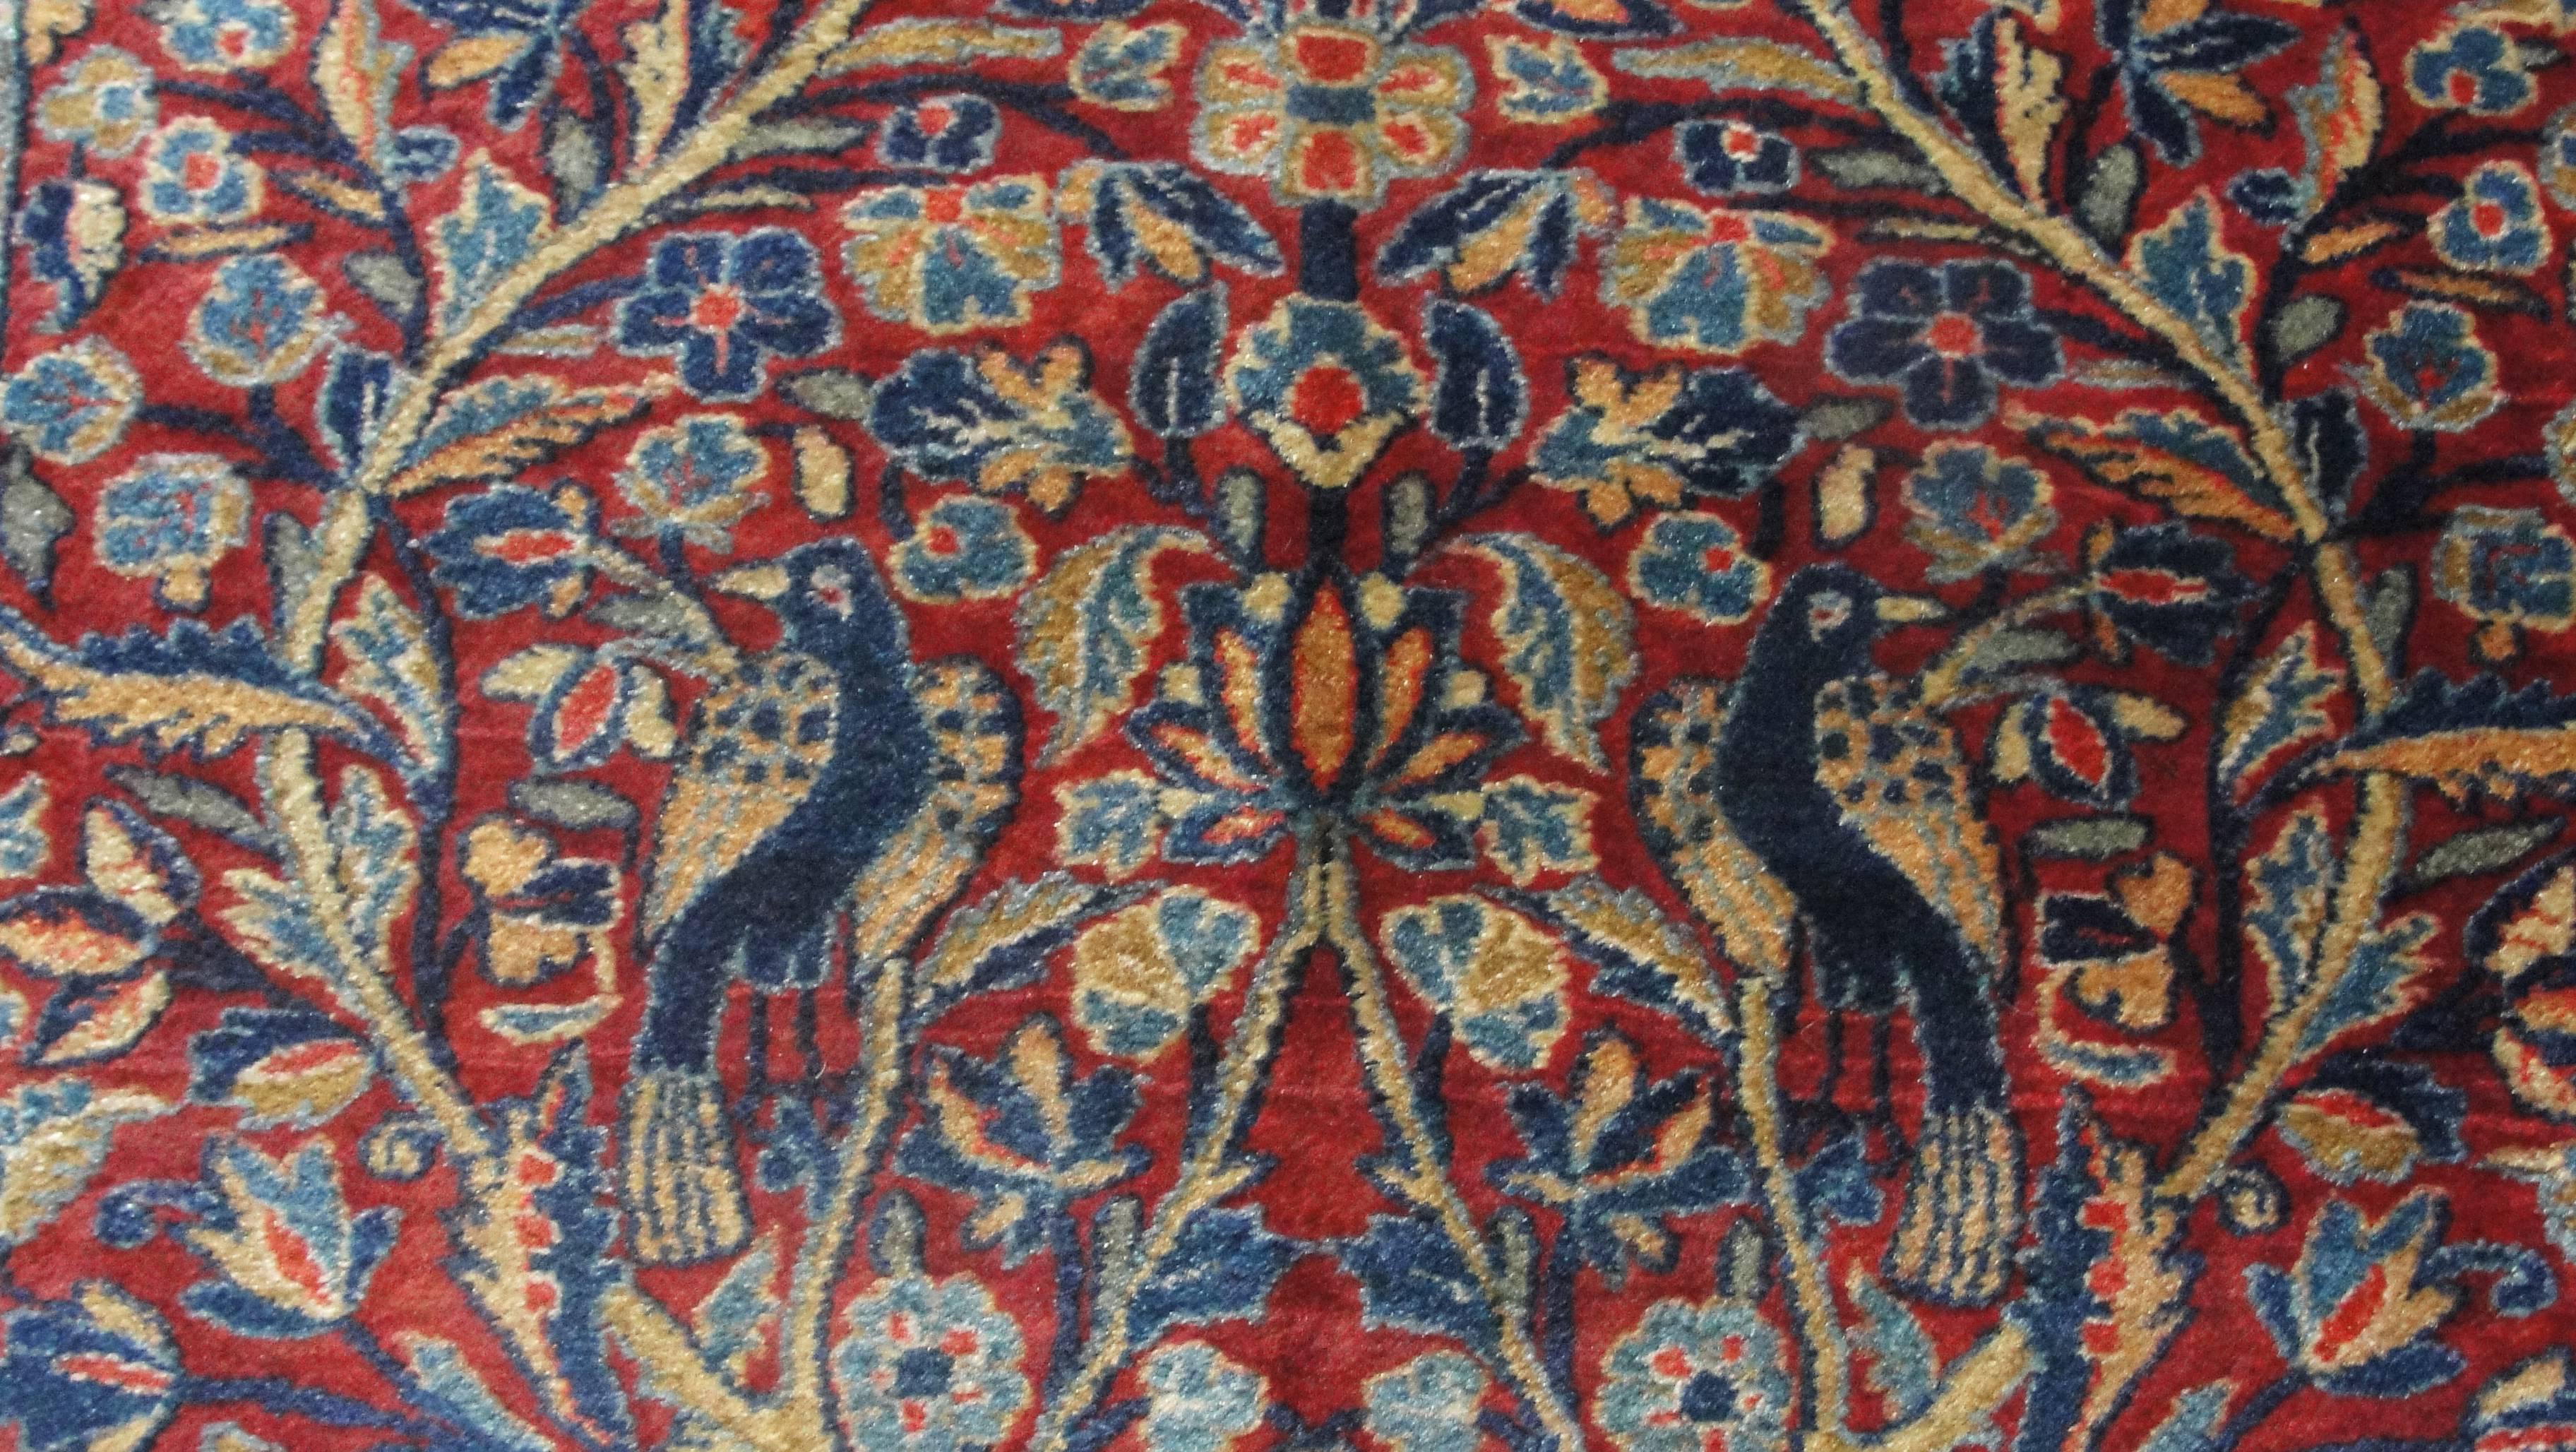 Hand-Woven Antique Three of Life Manchester Kashan Rug, 3' x 4'10